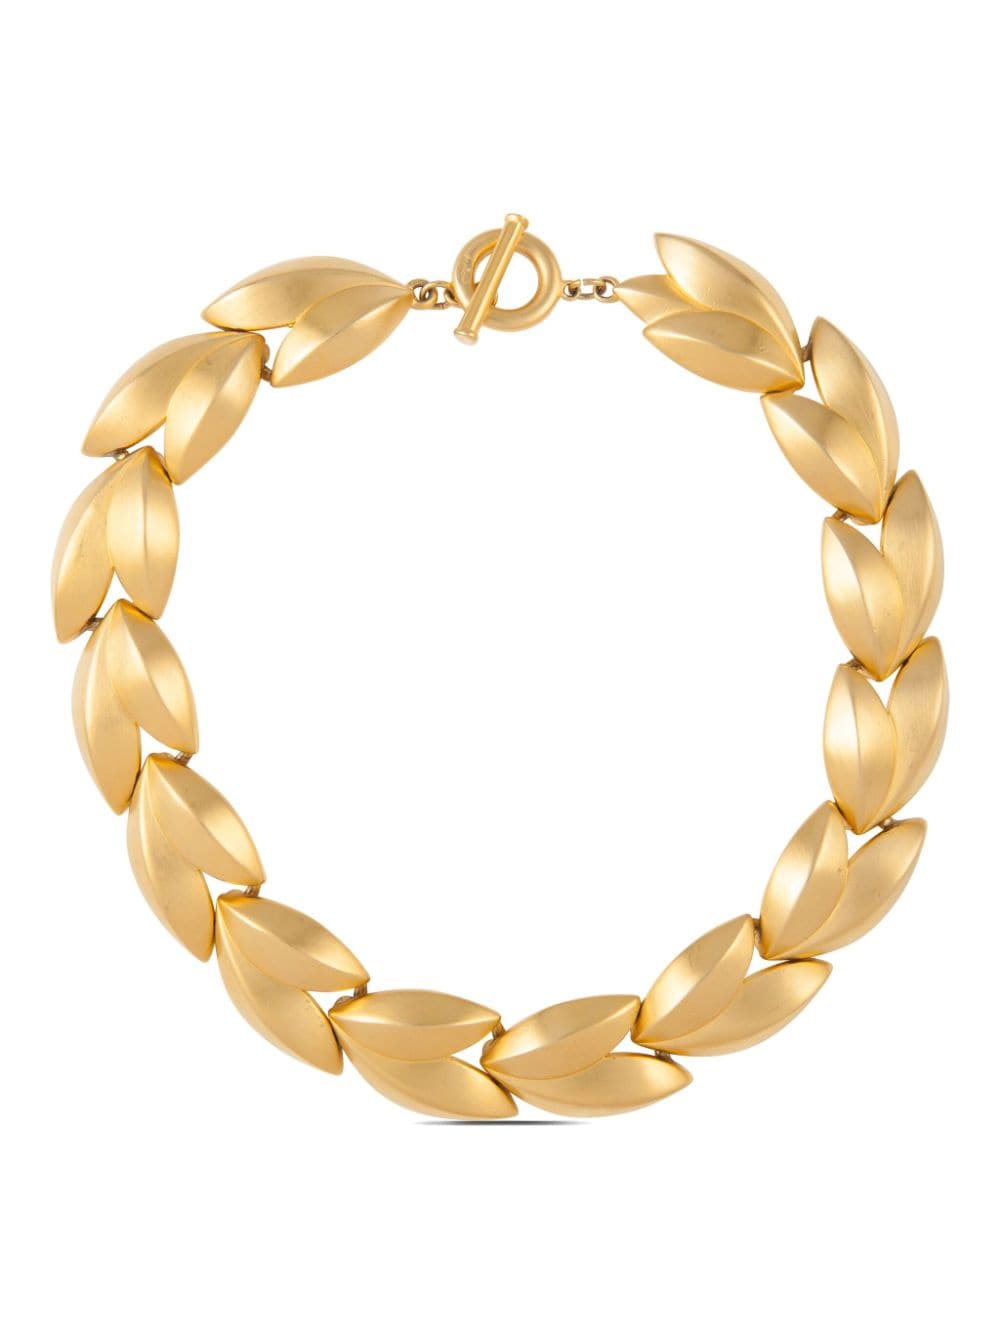 1980s pre-owned gold-plated leaf necklace